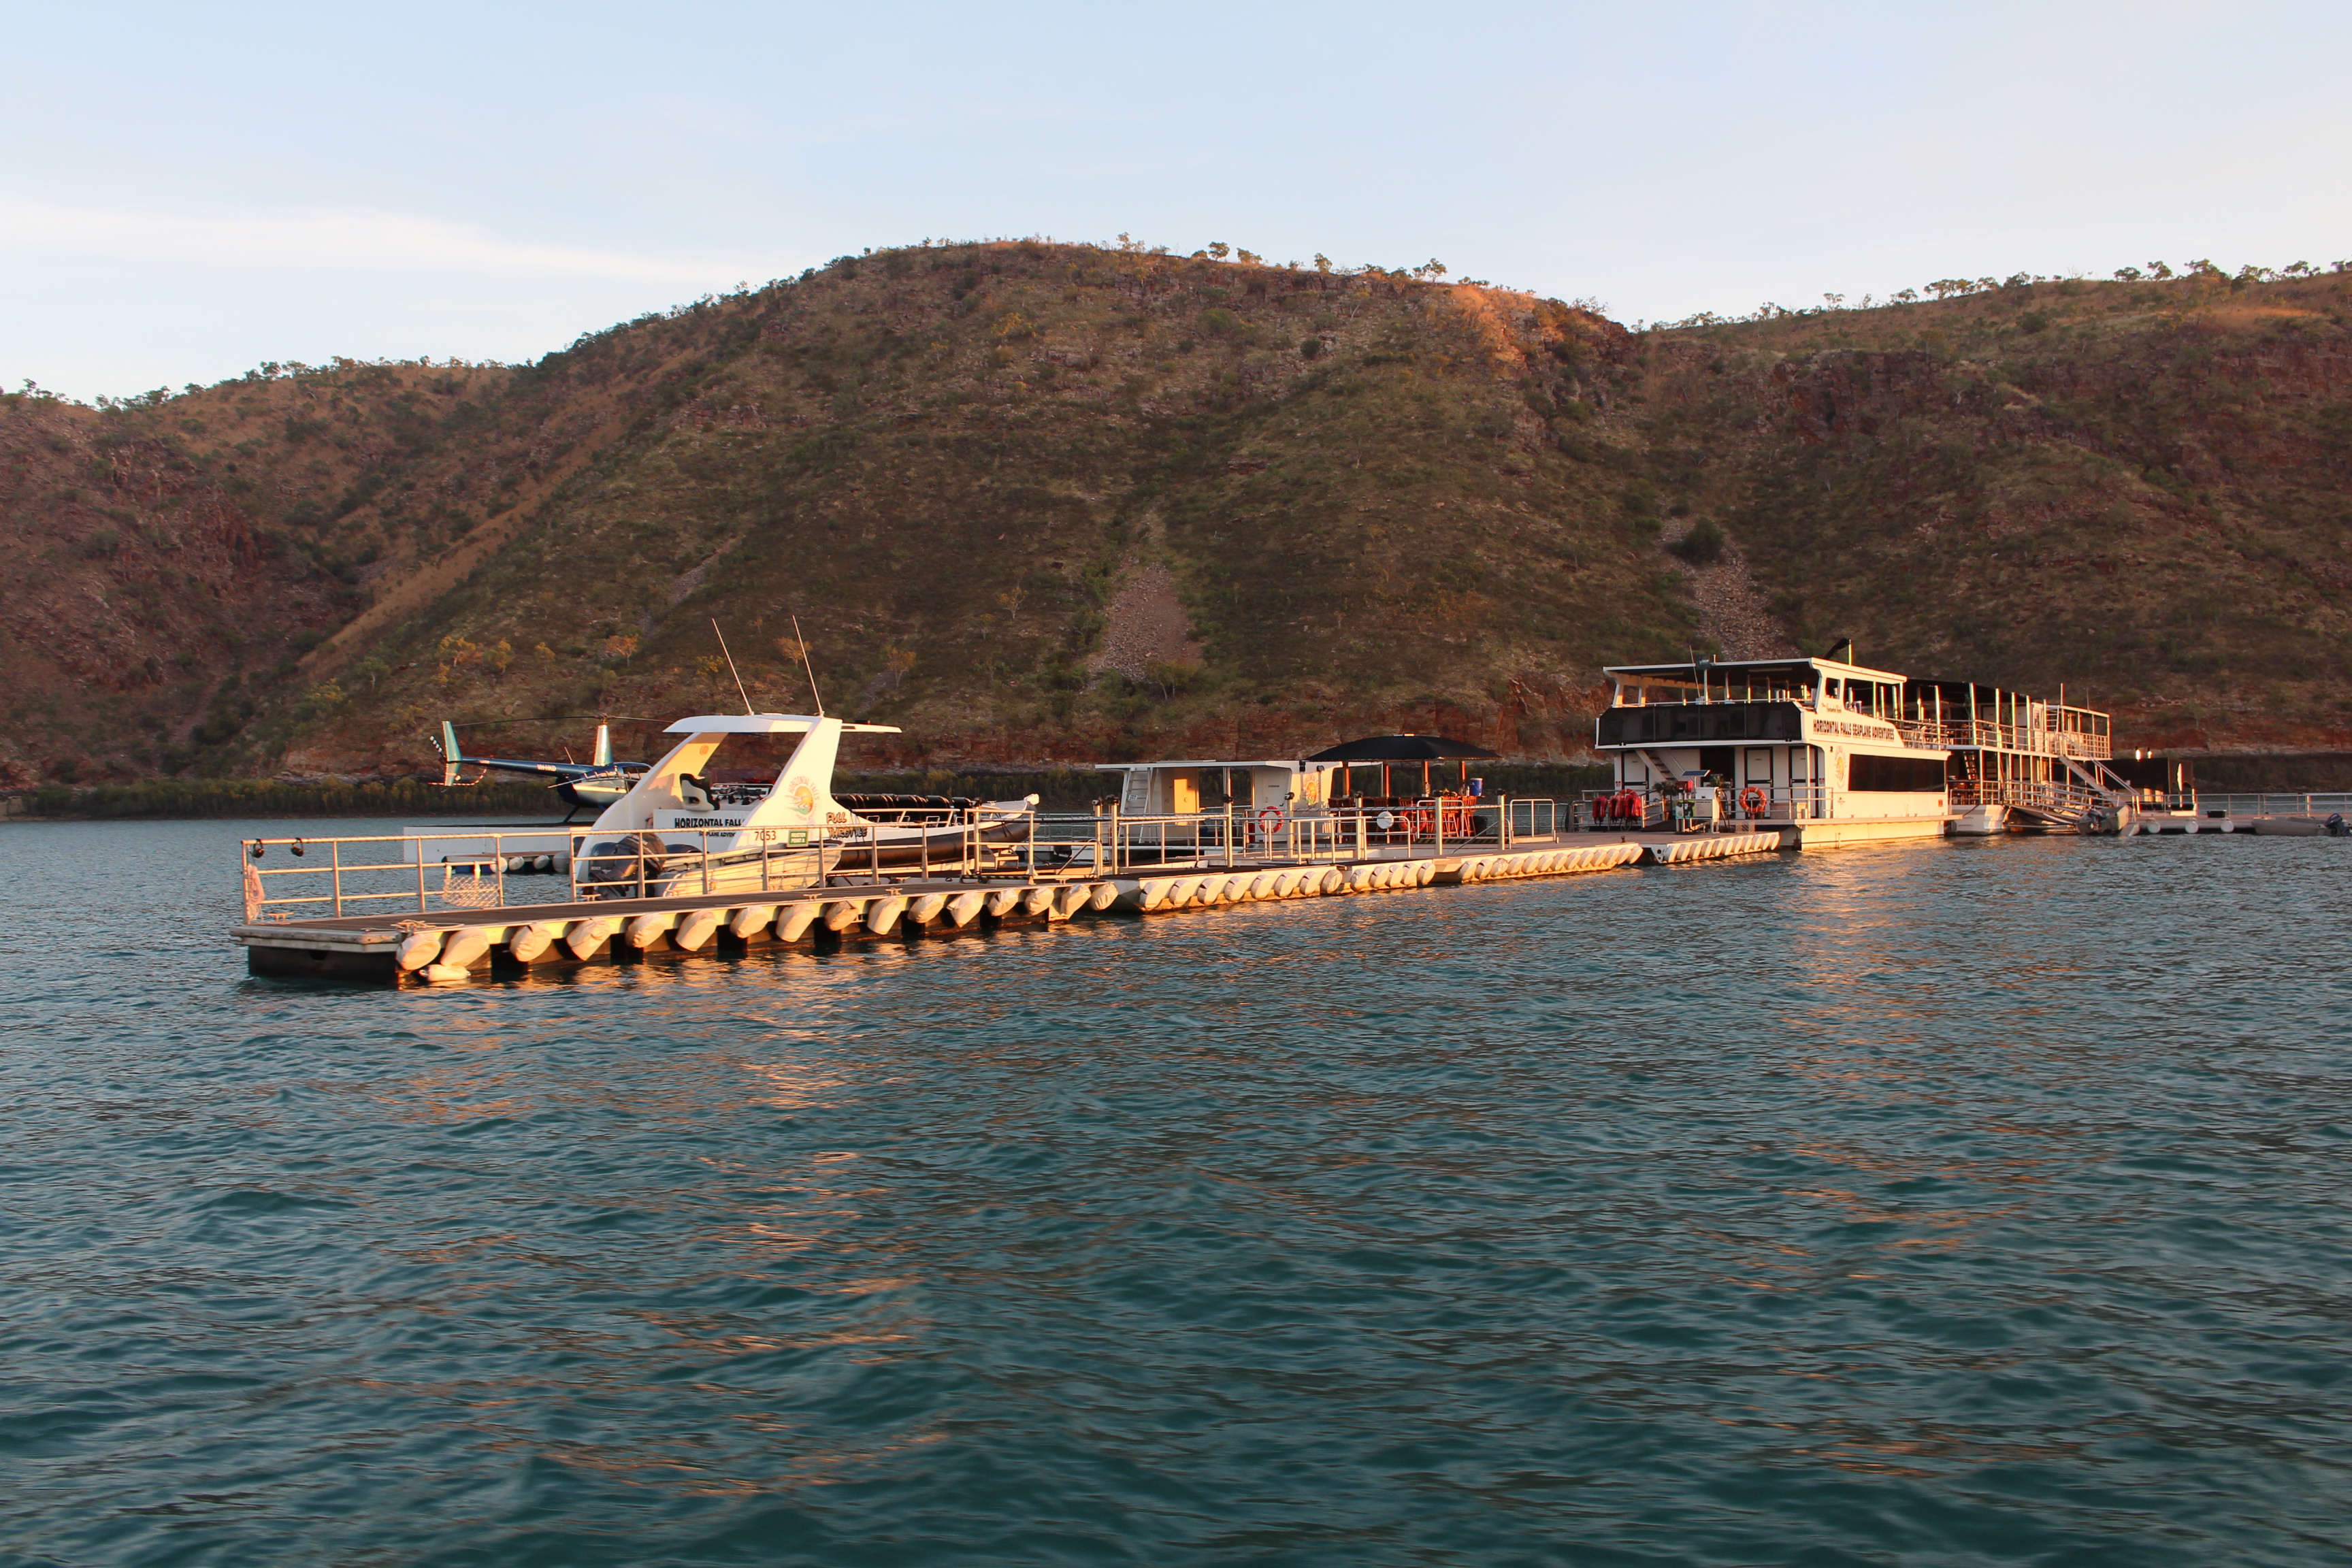 Horizontal falls Seaplane Adventures: Review of Derby Overnight Tour.